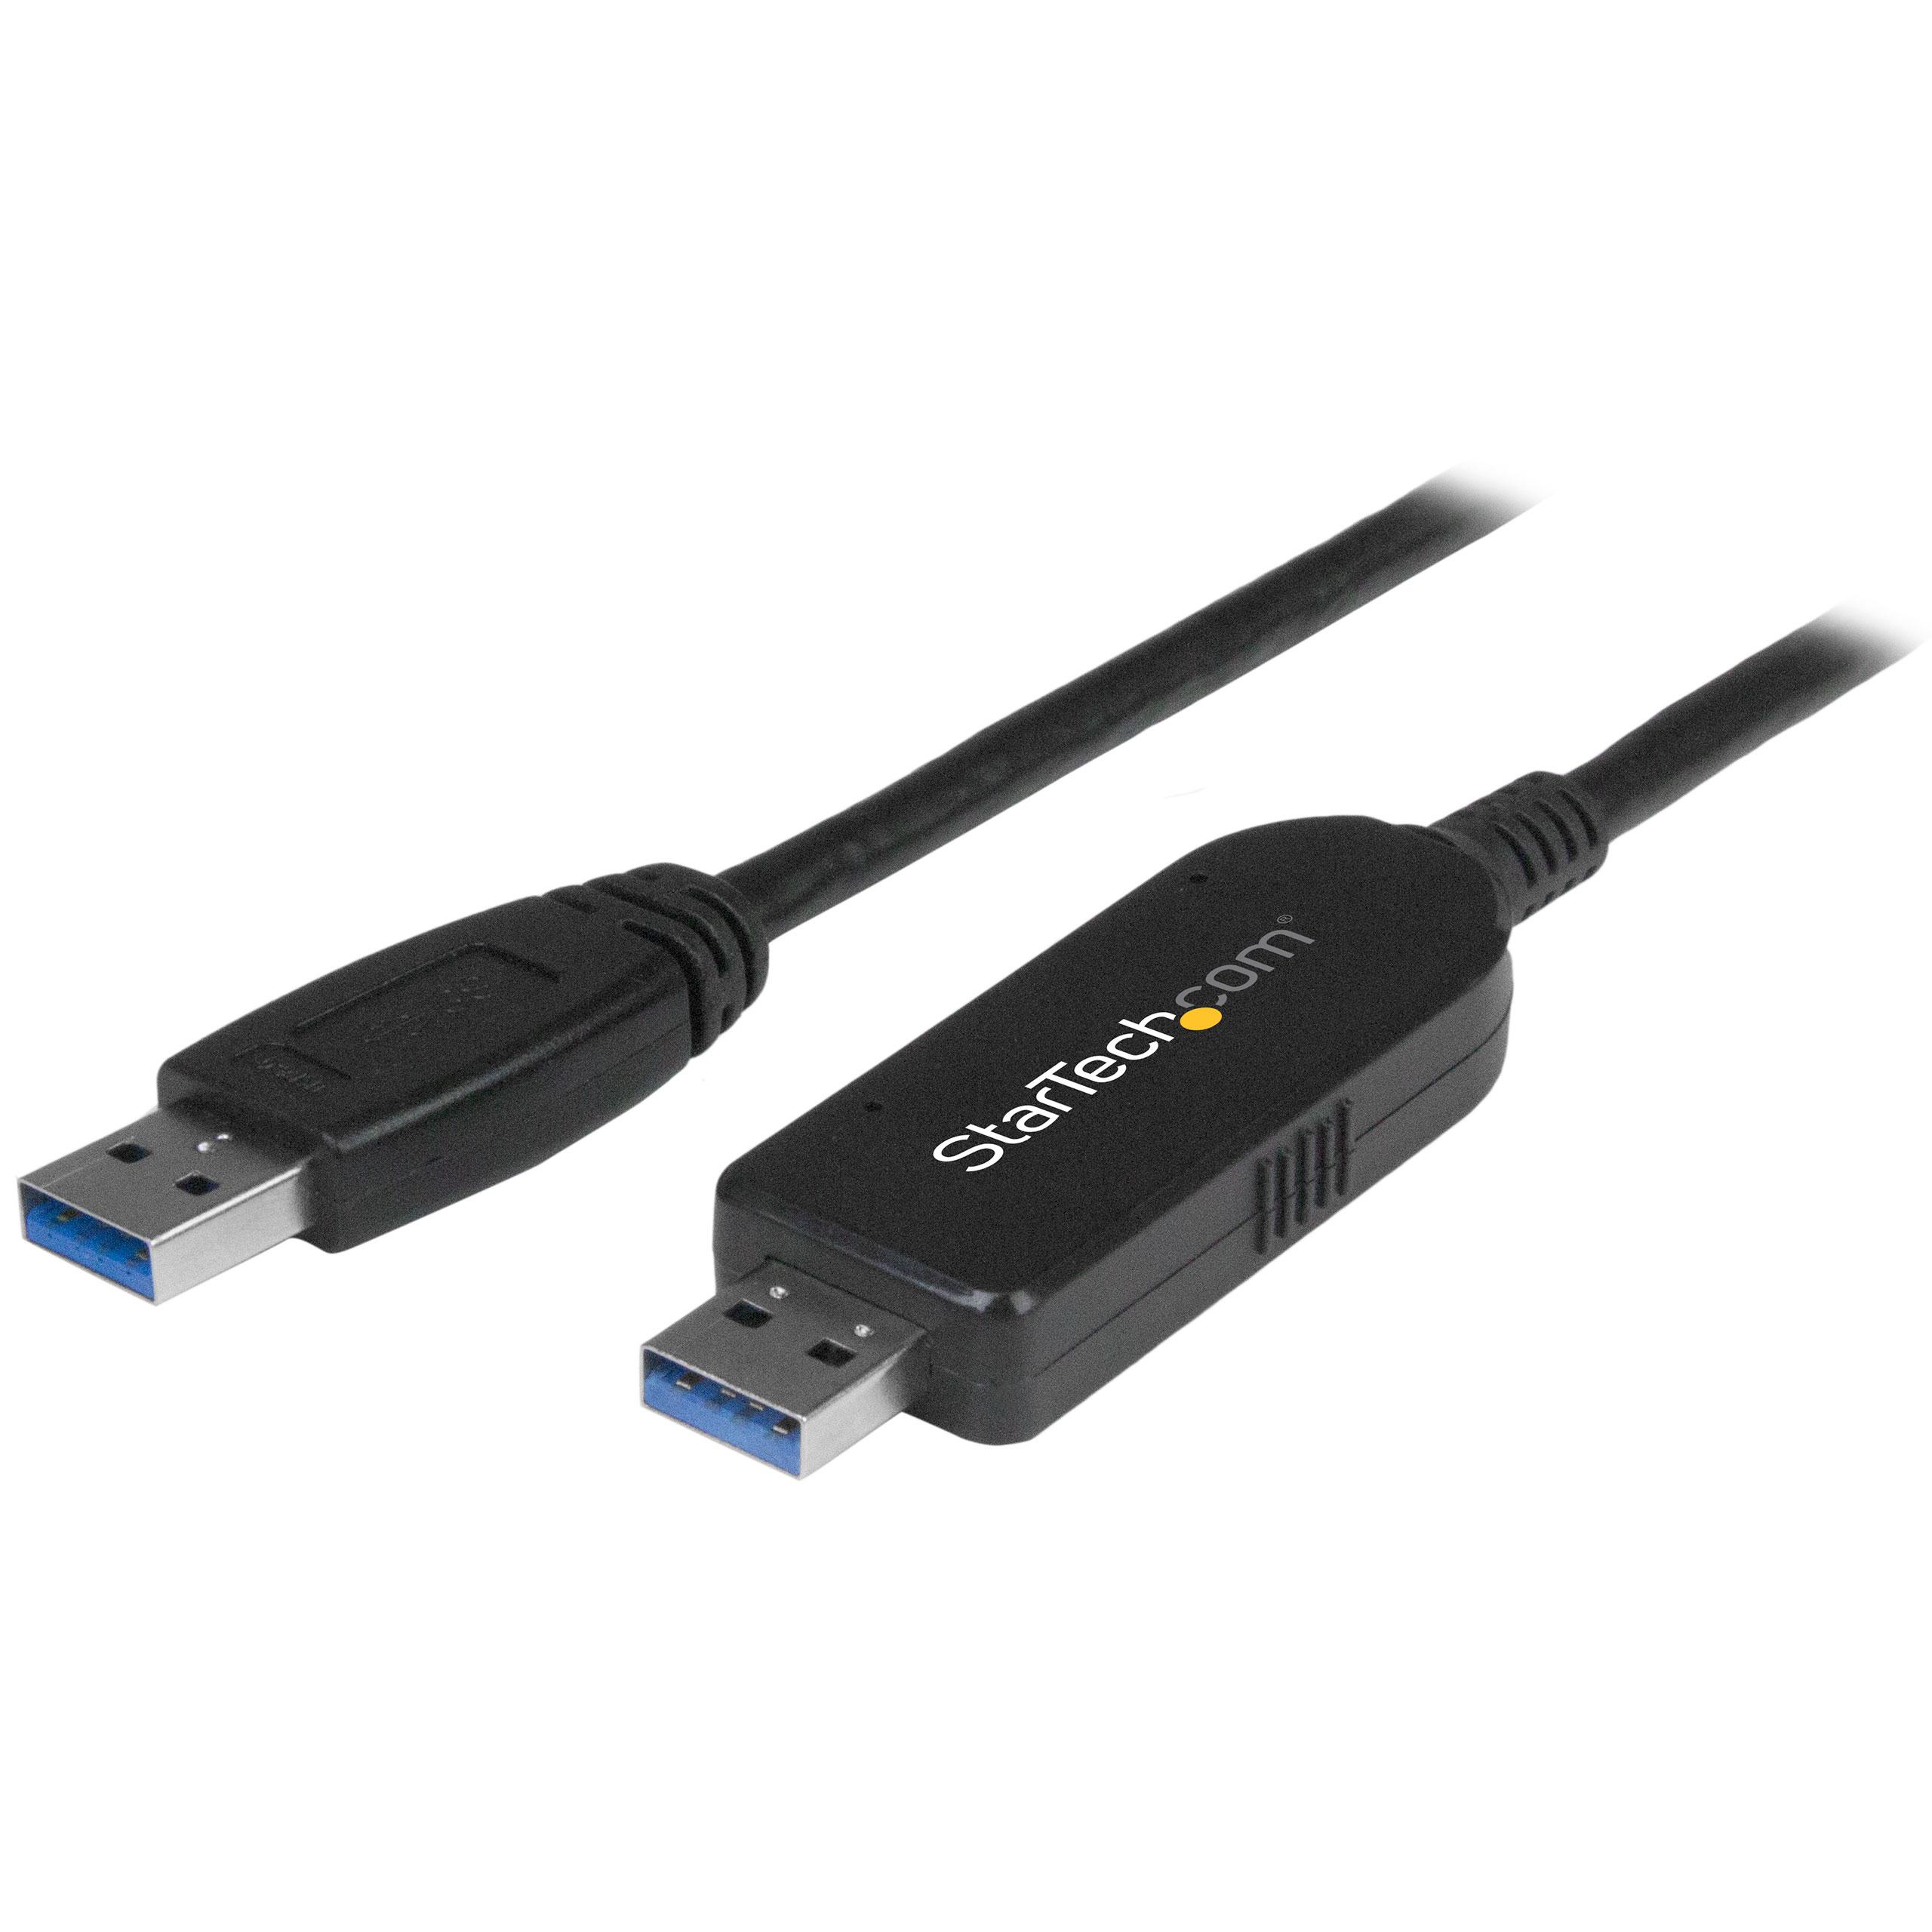 USB data transfer cable adapter